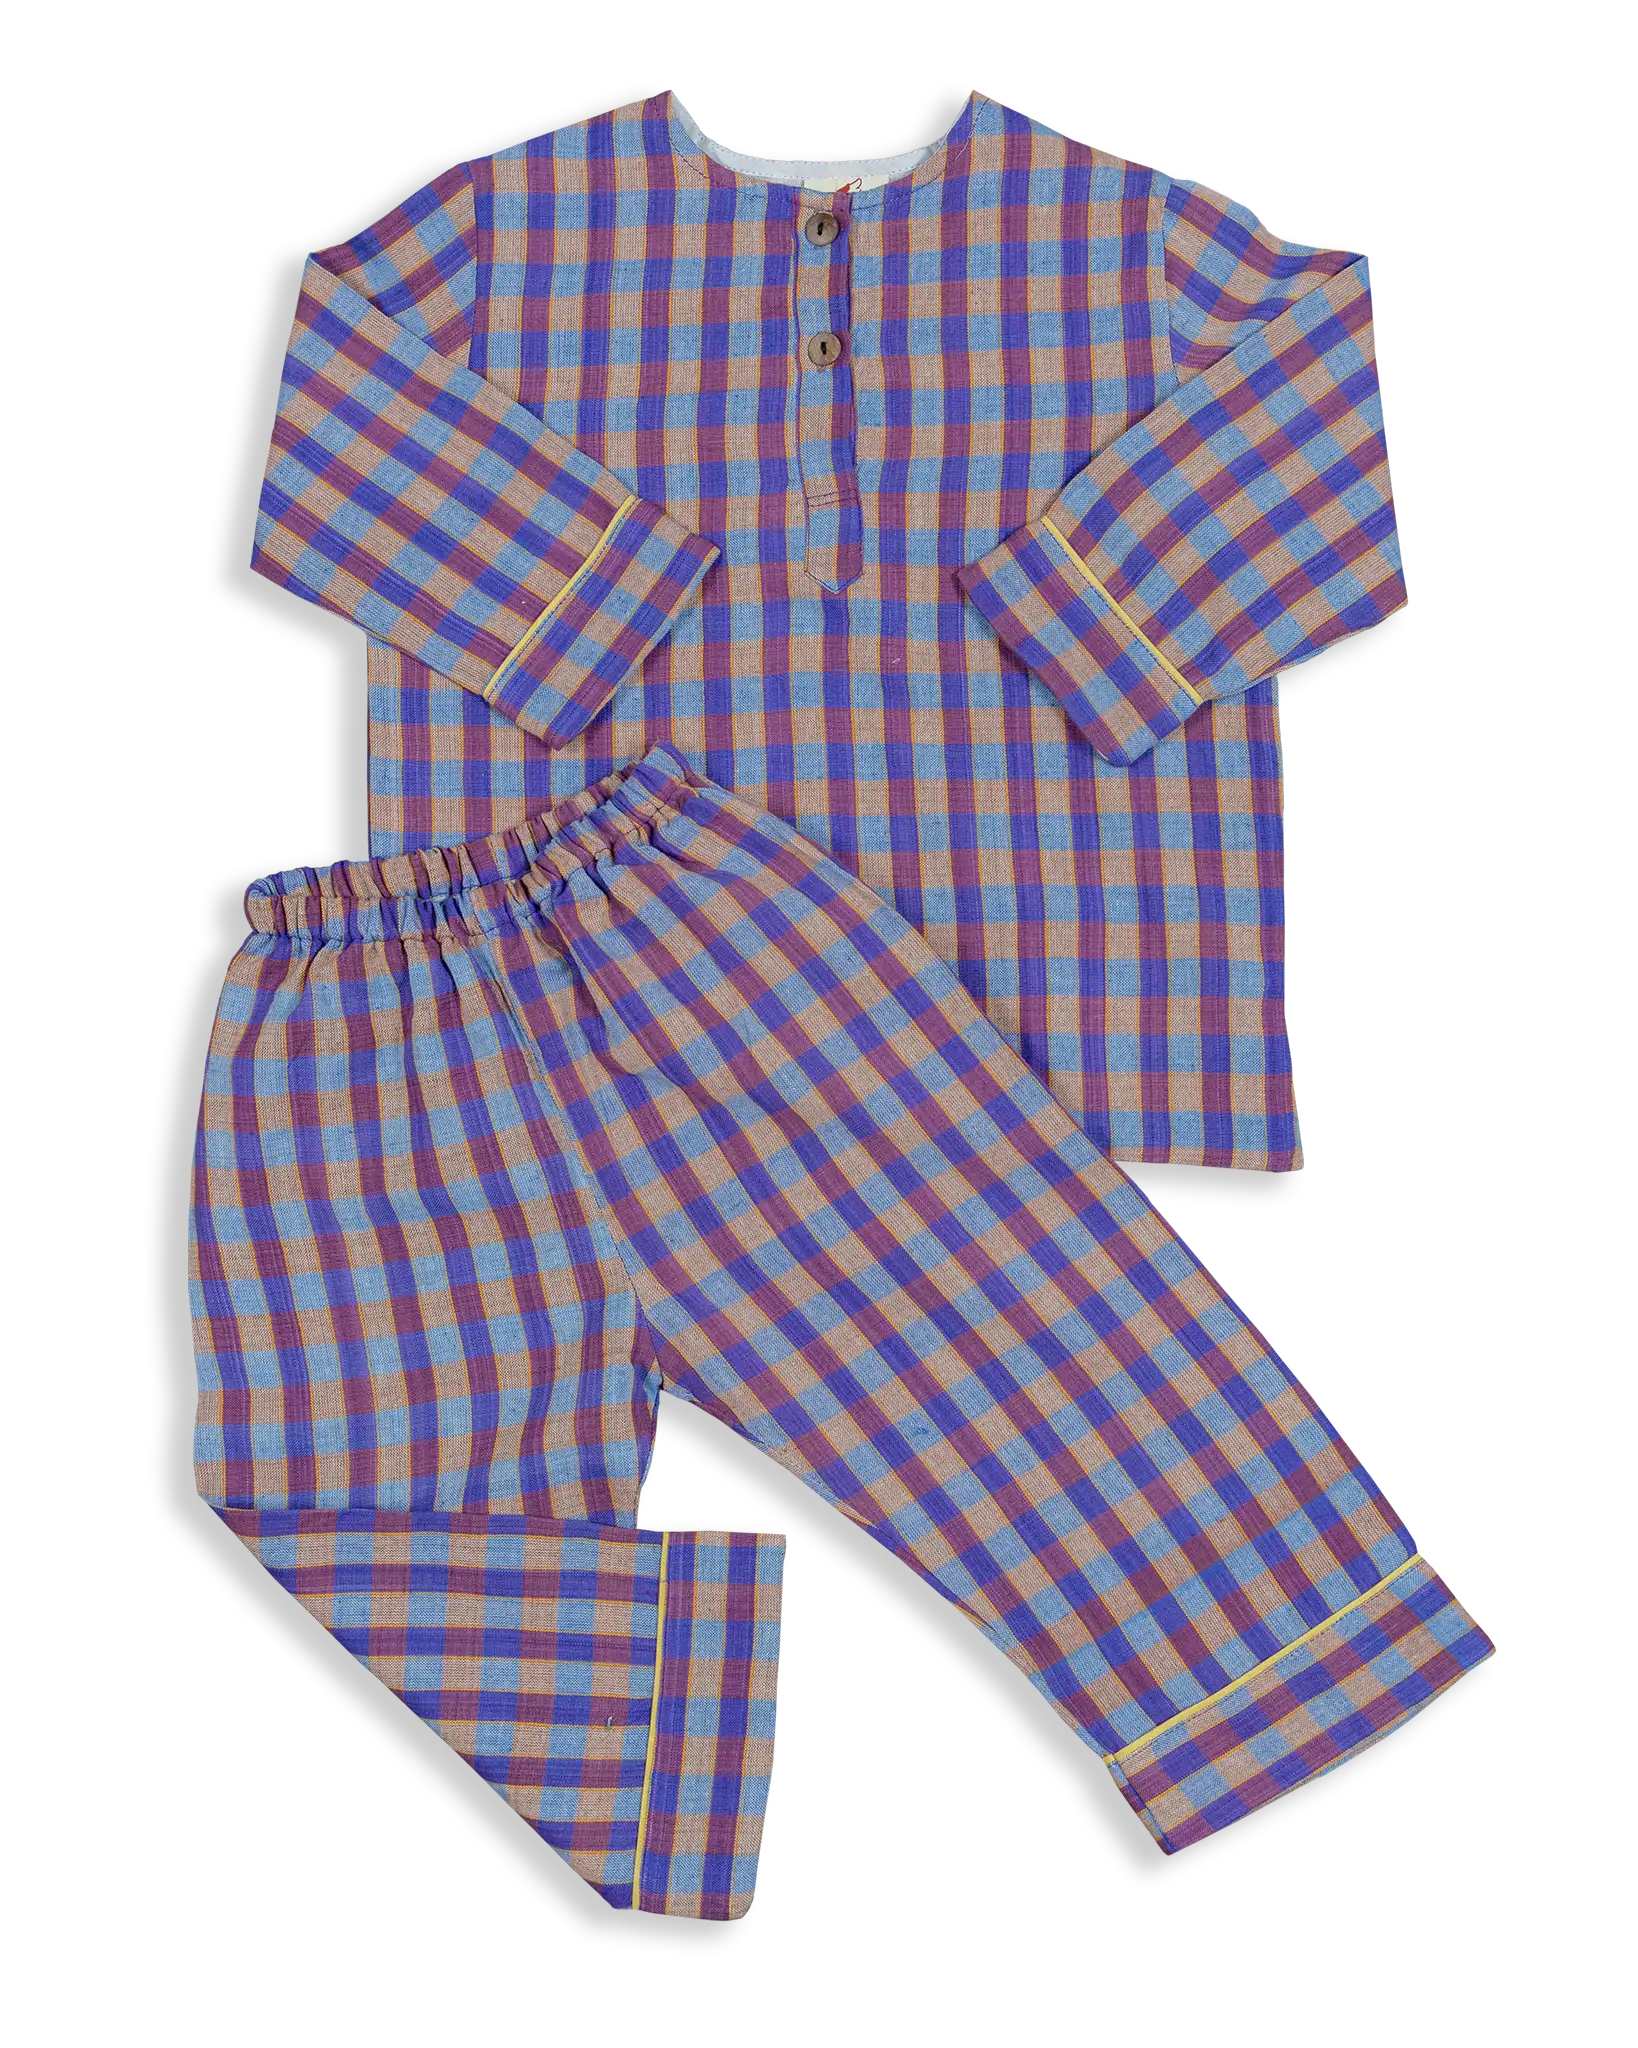 These classic cotton checked Pyjamas are some of our best selling products. Designed and woven here in Nepal they are made with the finest voile lining. It is also known as cotton cashmere, well known and used for kids wear due to the softness and its breathable nature. These unisex pyjamas are soft and sensitive to the skin, offering you peace of mind when dressing your baby. High quality and comfortable - the perfect addition to any baby wardrobe.